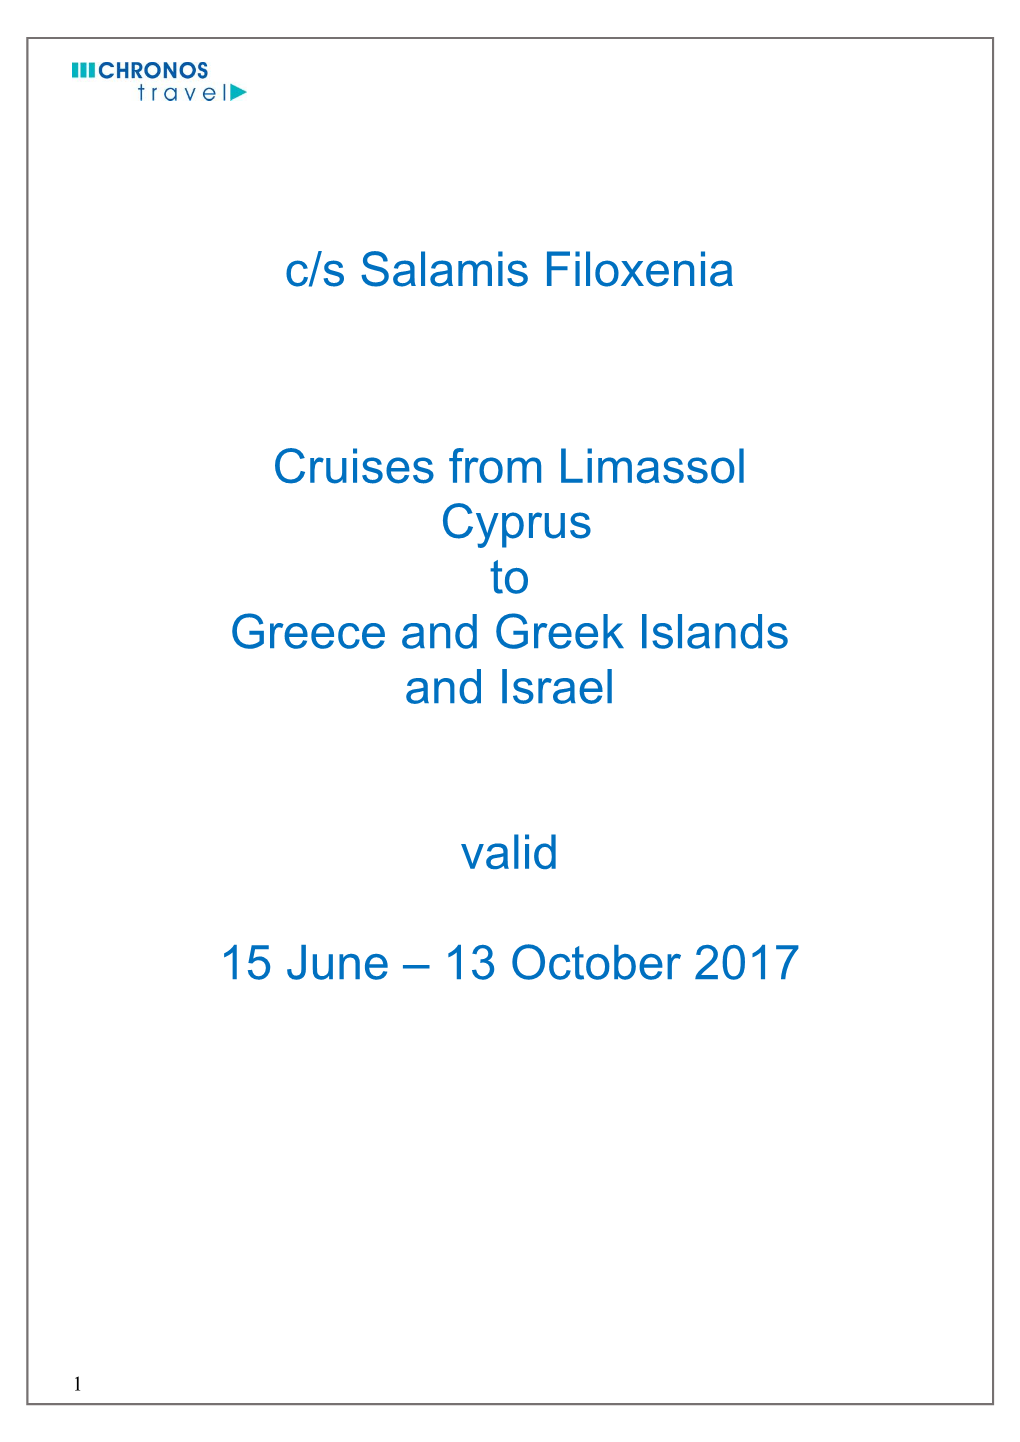 C/S Salamis Filoxenia Cruises from Limassol Cyprus